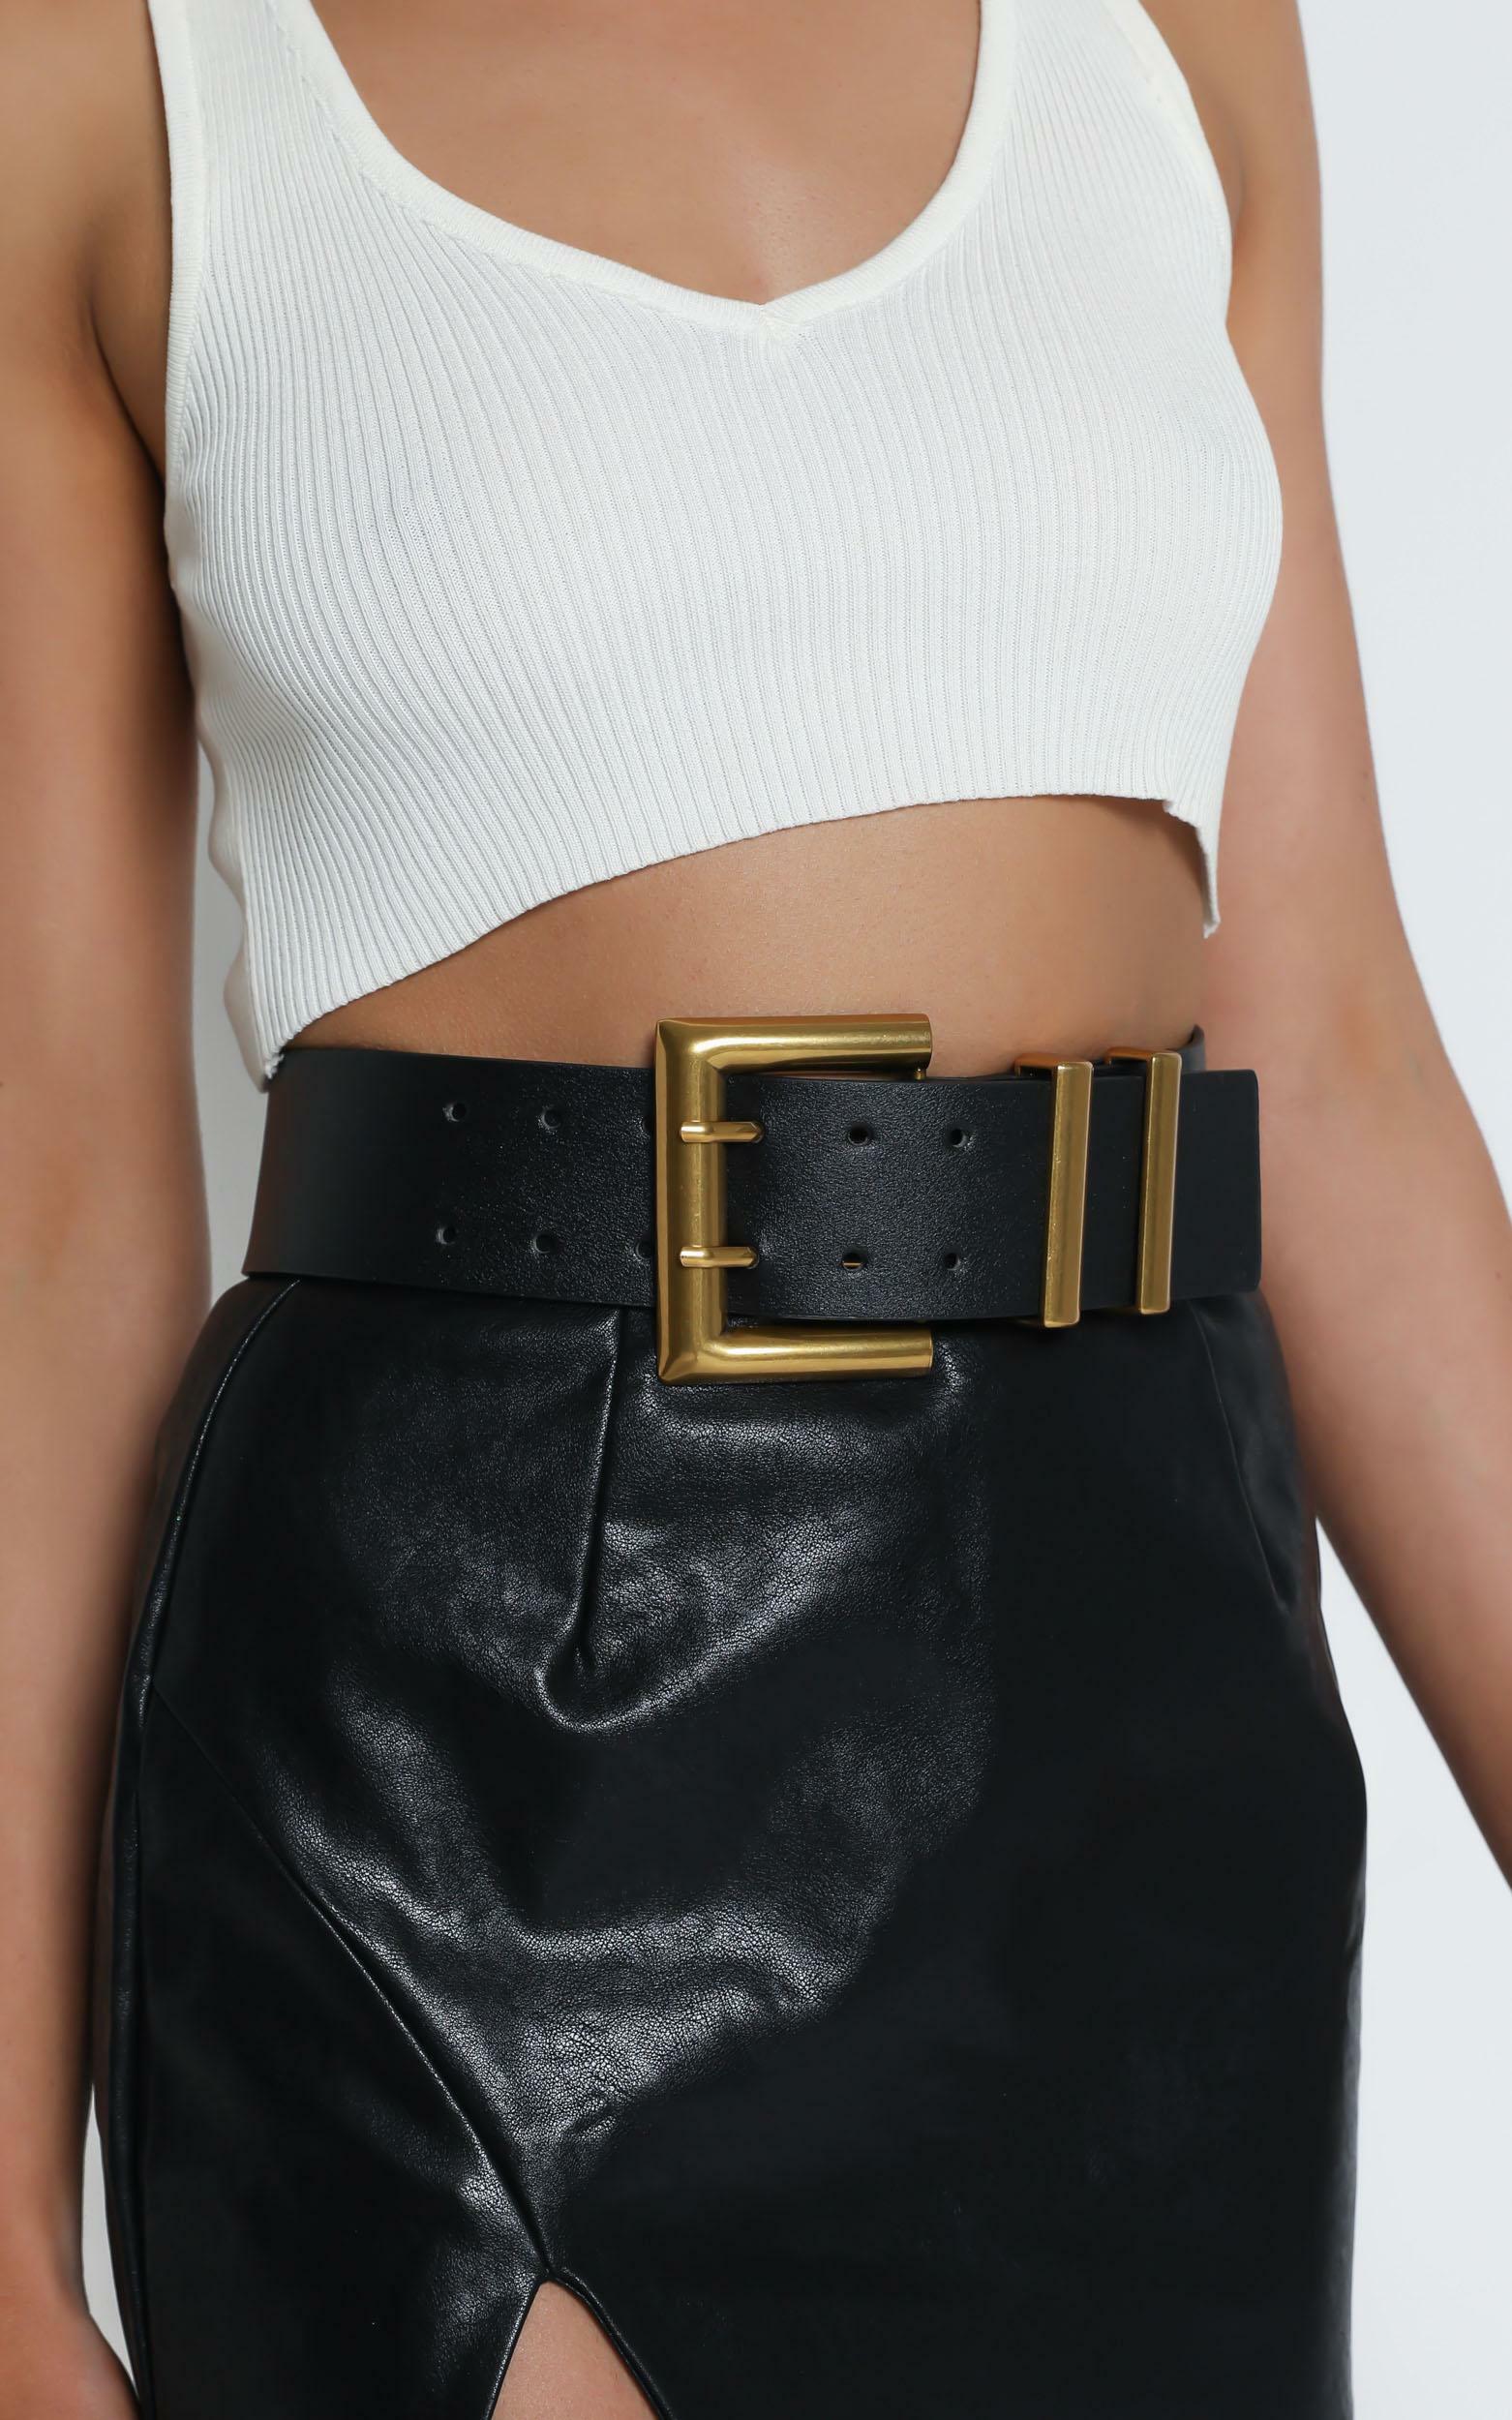 Pair It Back With Belt in Black and Gold, , hi-res image number null